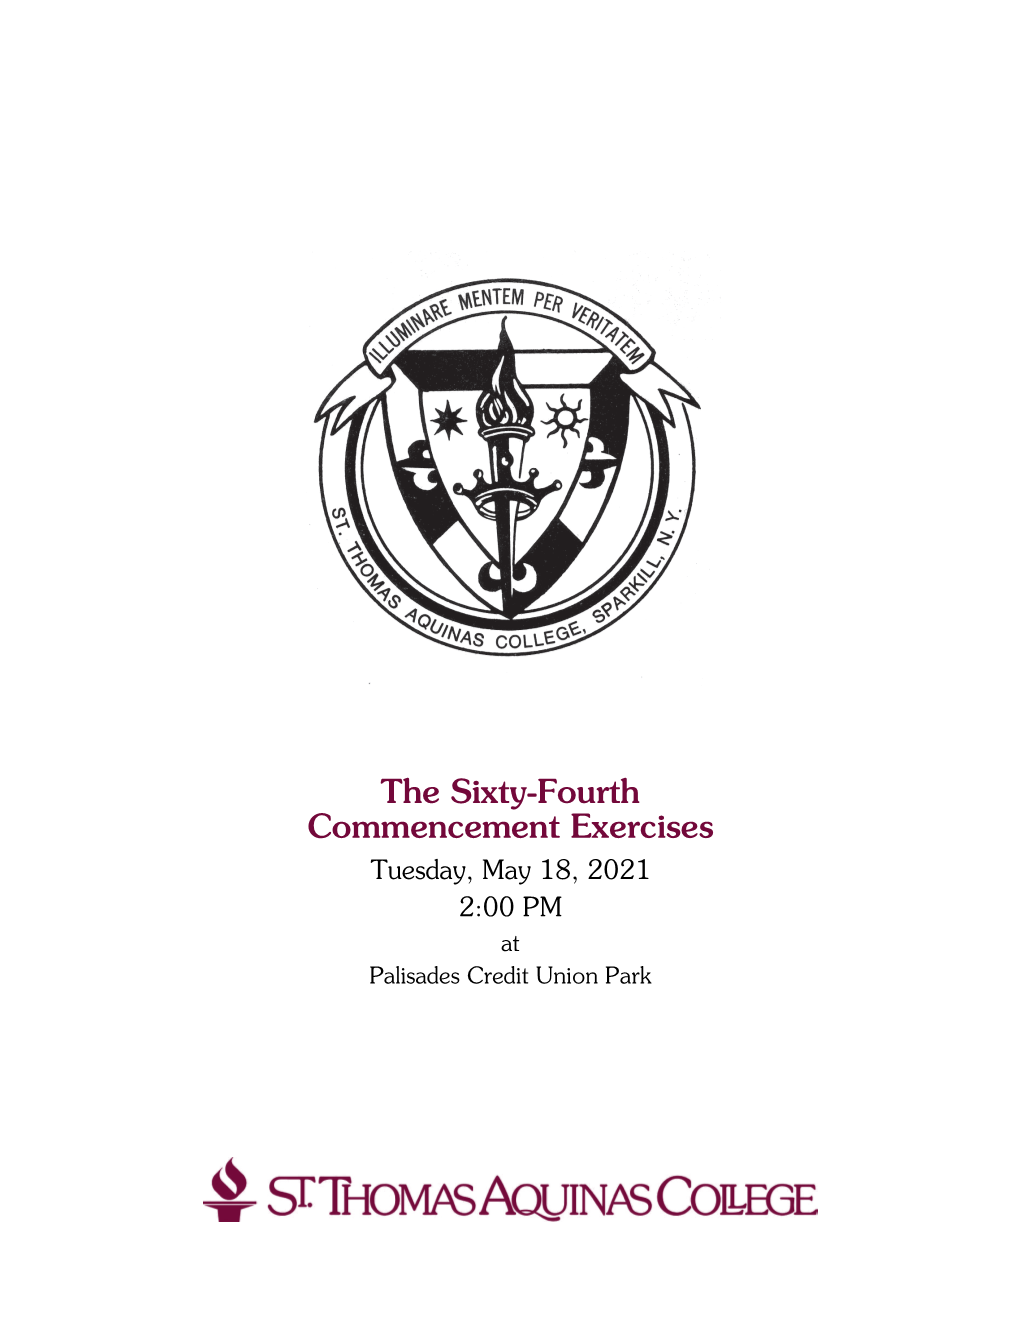 The Sixty-Fourth Commencement Exercises Tuesday, May 18, 2021 2:00 PM at Palisades Credit Union Park